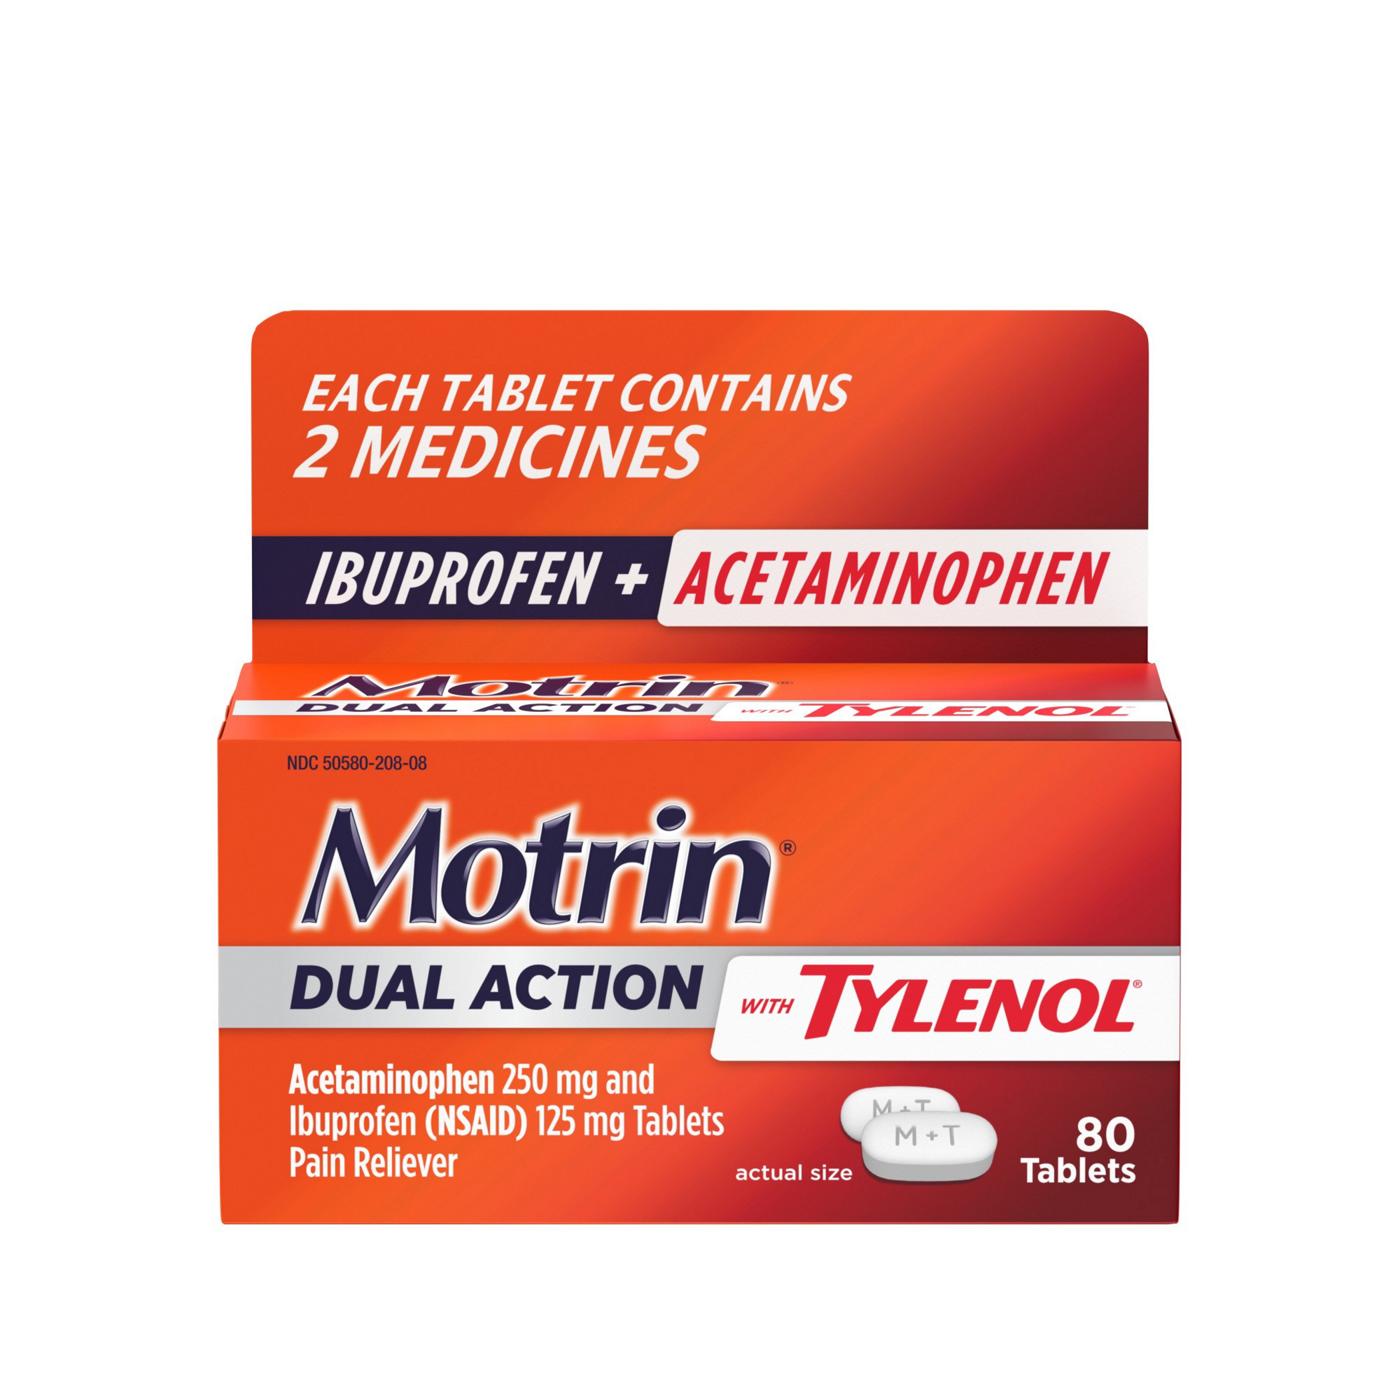 Motrin Dual Action With Tylenol Tablets; image 1 of 3